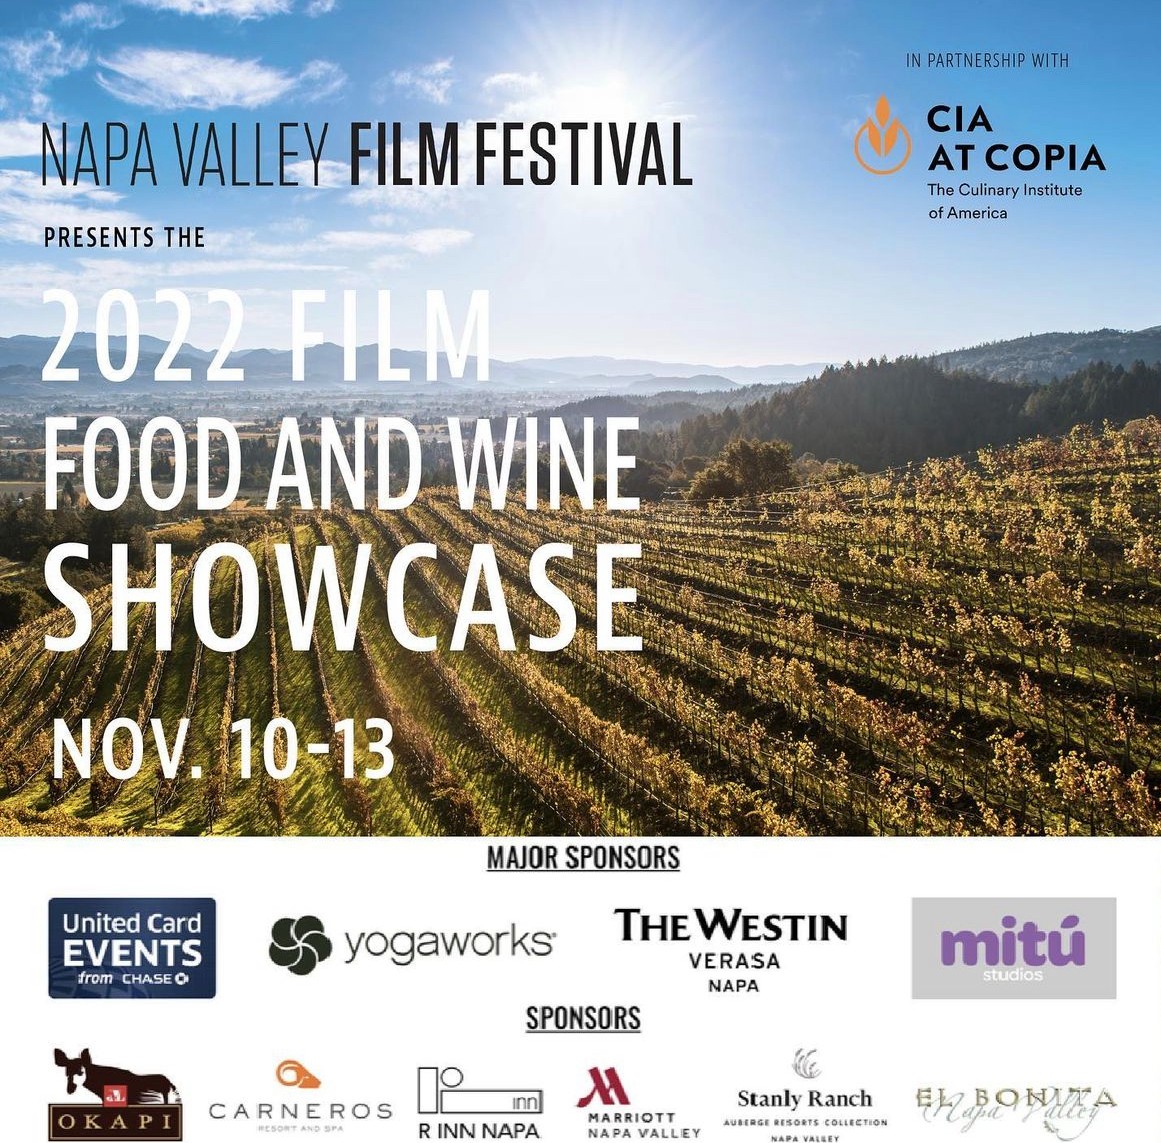 Treat yourself to great food, wine and films. 😍 Starting Friday, November 10 and running through Sunday, November 13, the Napa Valley Film Festival and the CIA at Copia will present its inaugural Film, Food and Wine Showcase. 📸: NapaFilmFest ➡️ fal.cn/3tnta